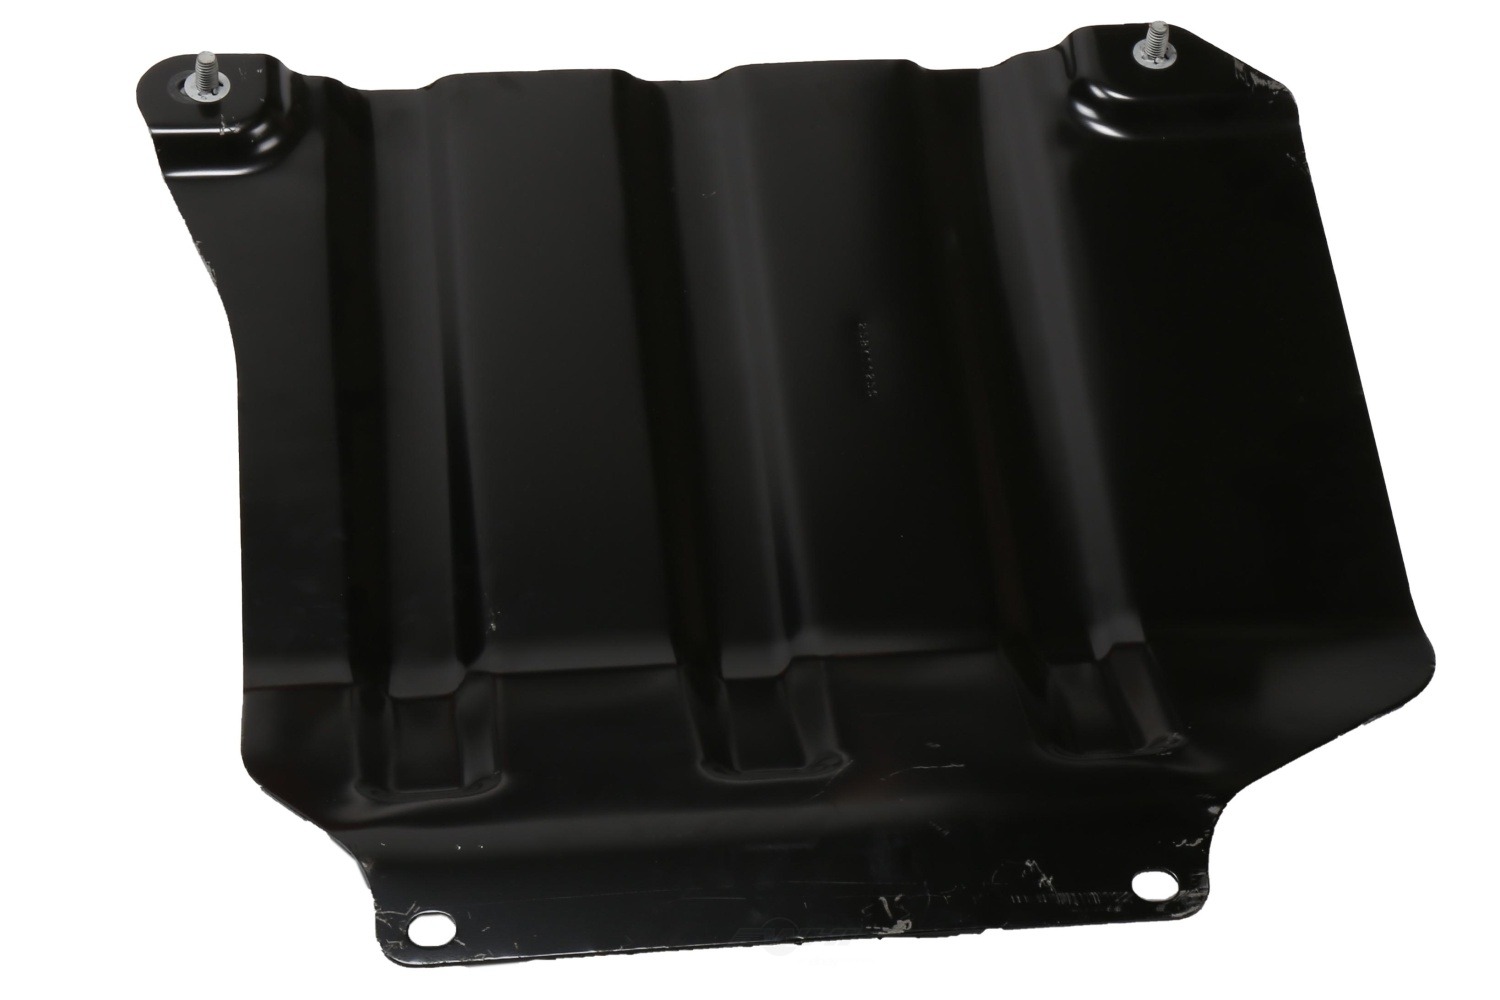 GM GENUINE PARTS - Skid Plate (Engine Oil Pan) - GMP 25871125